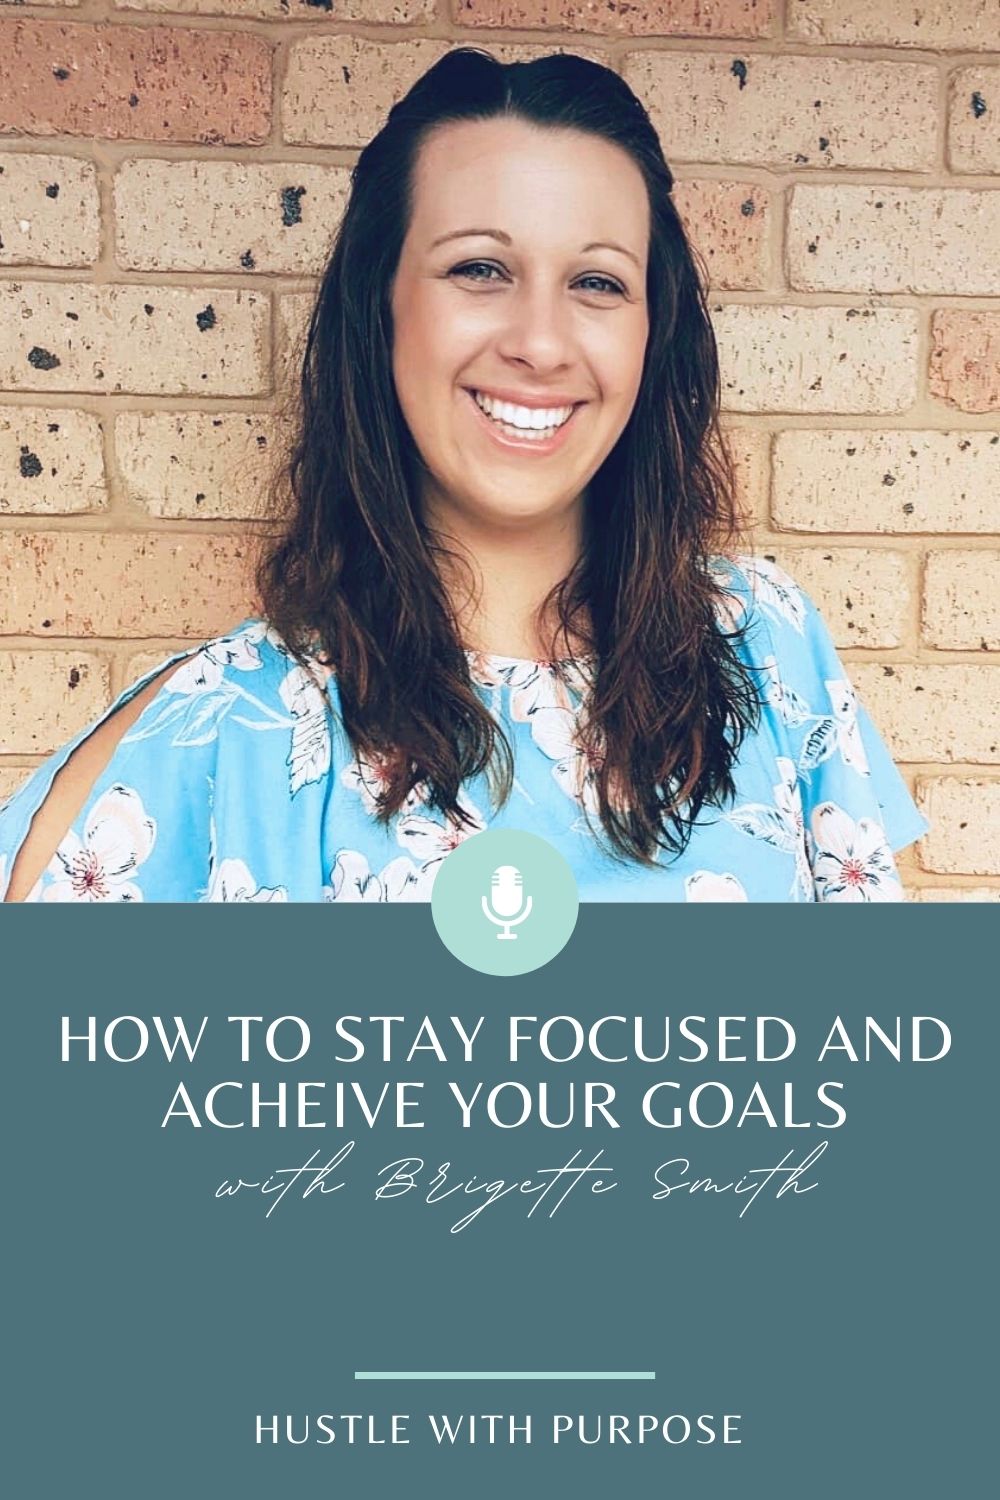 How to Stay Focused and Achieve Your Goals with Brigette Smith 1